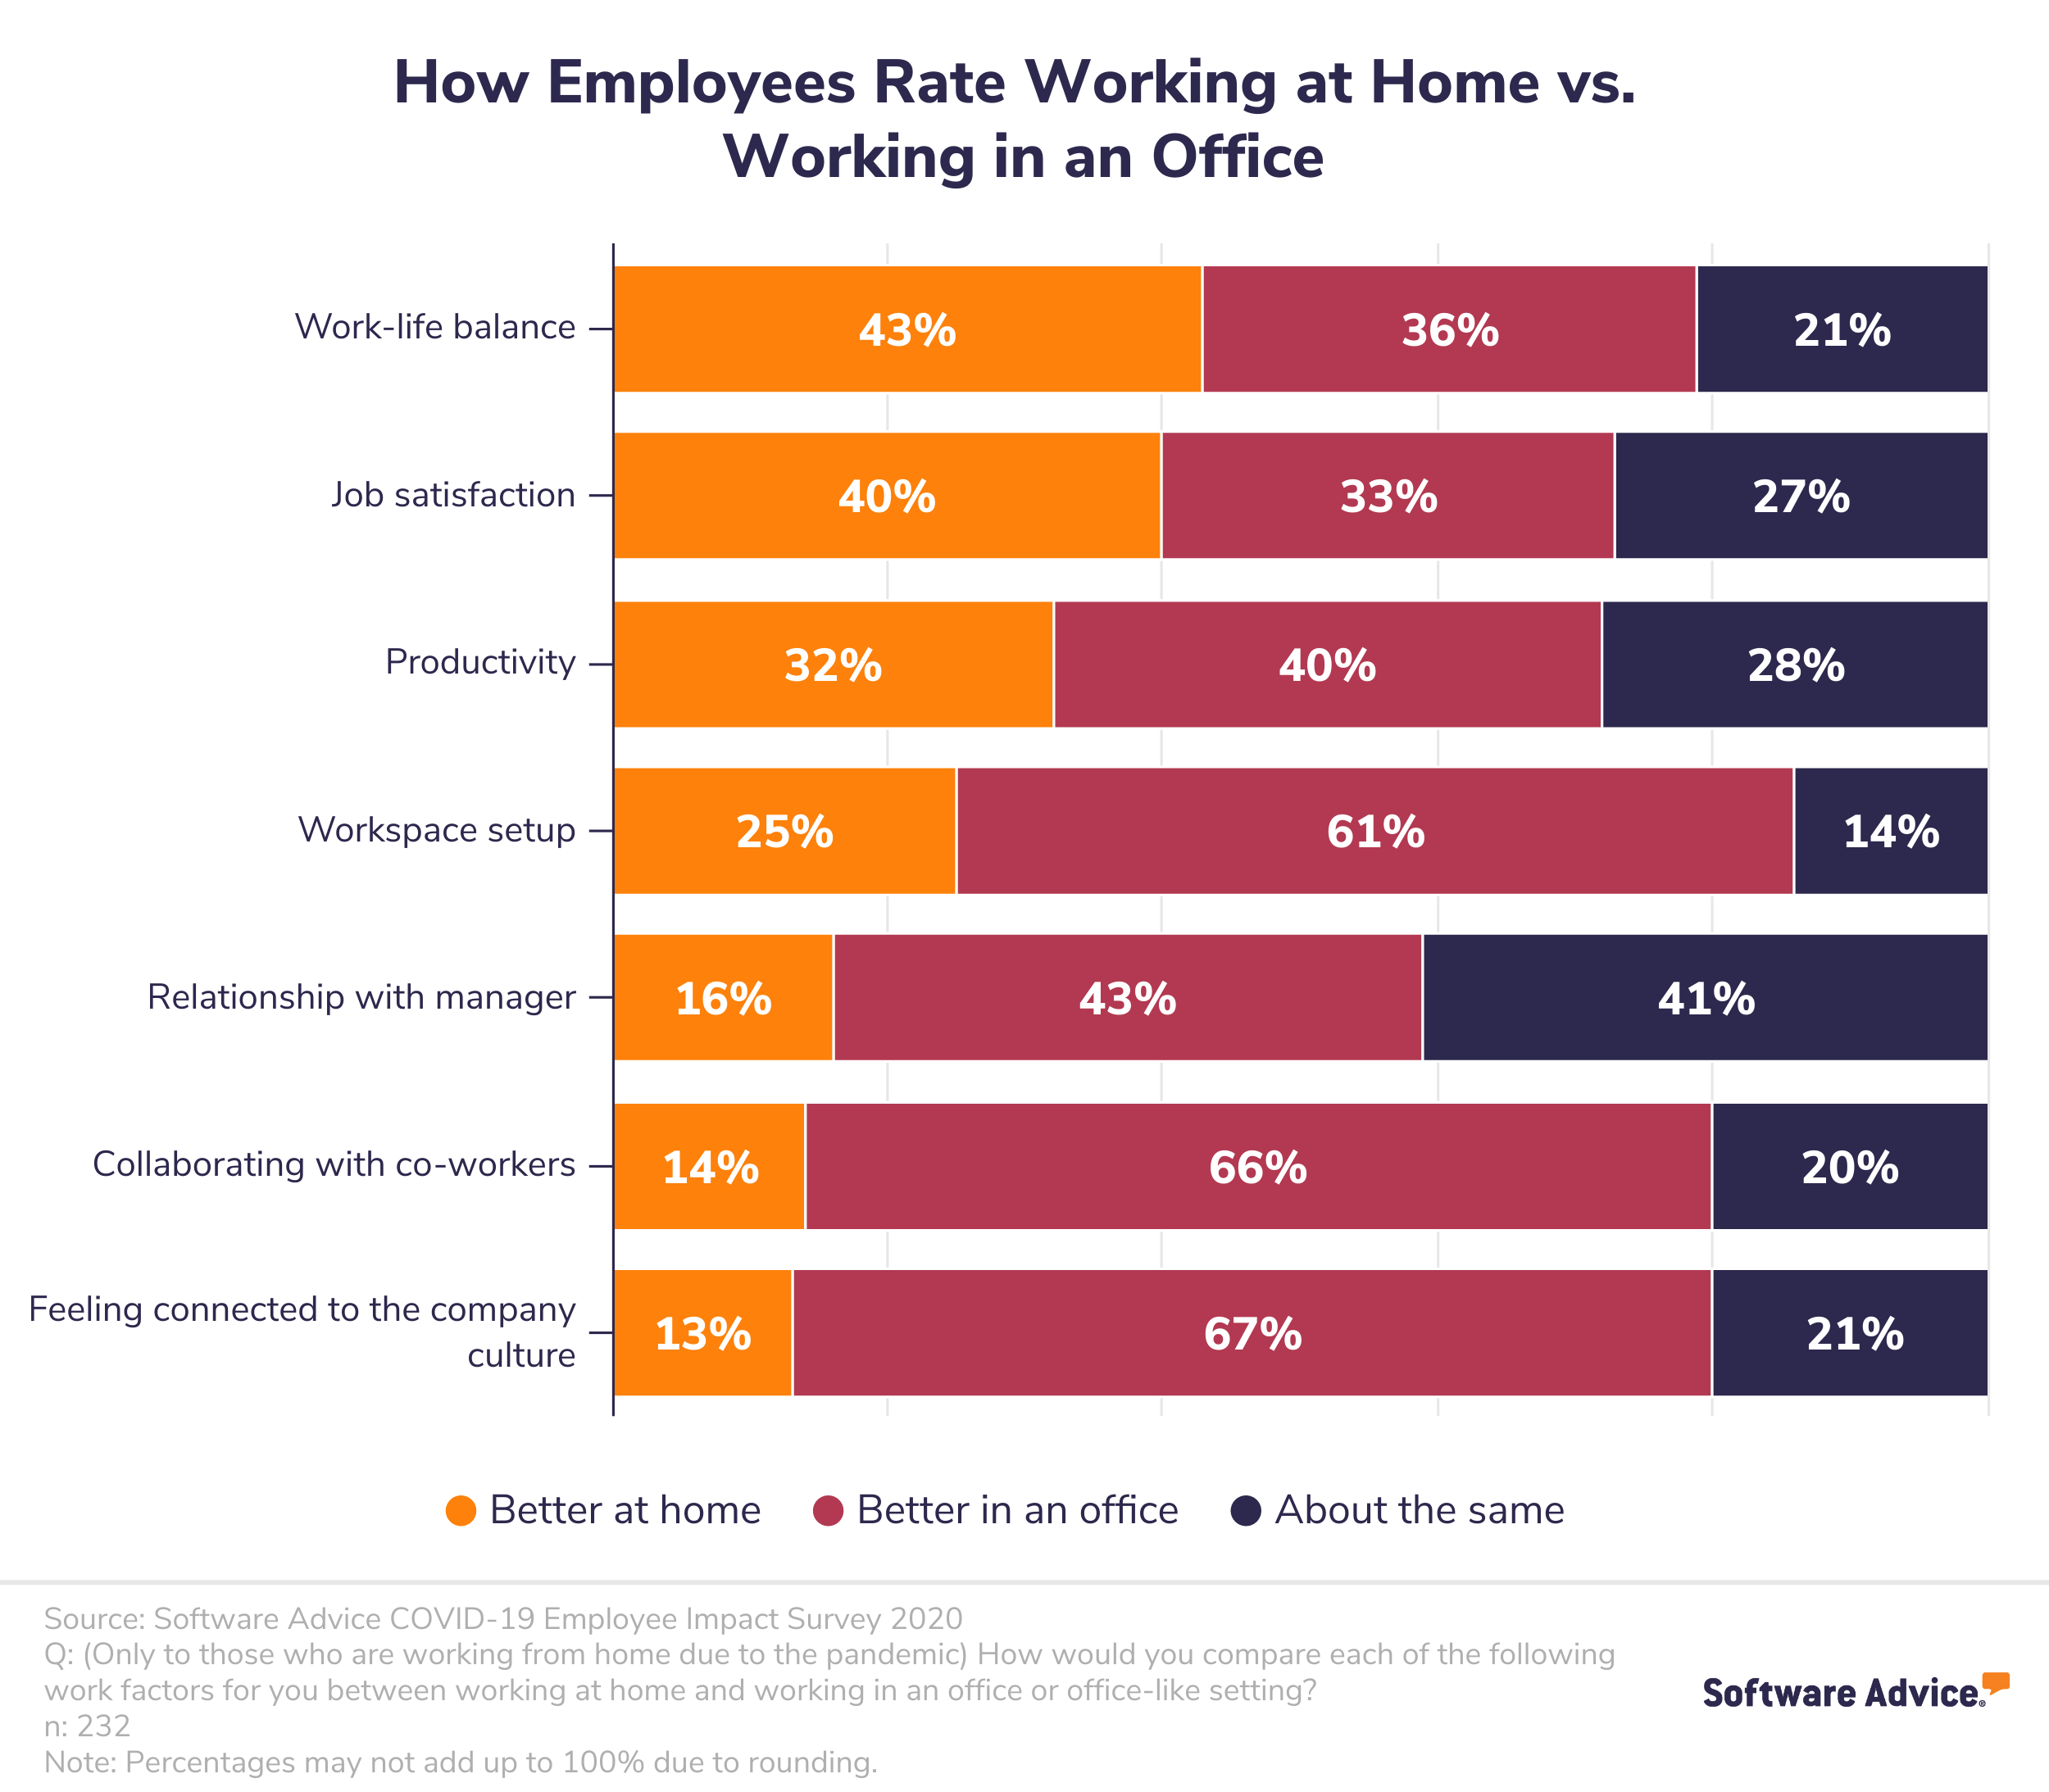 Bar-chart-showing-how-employees-compare-working-at-home-vs.-working-in-an-office-for-different-work-factors.